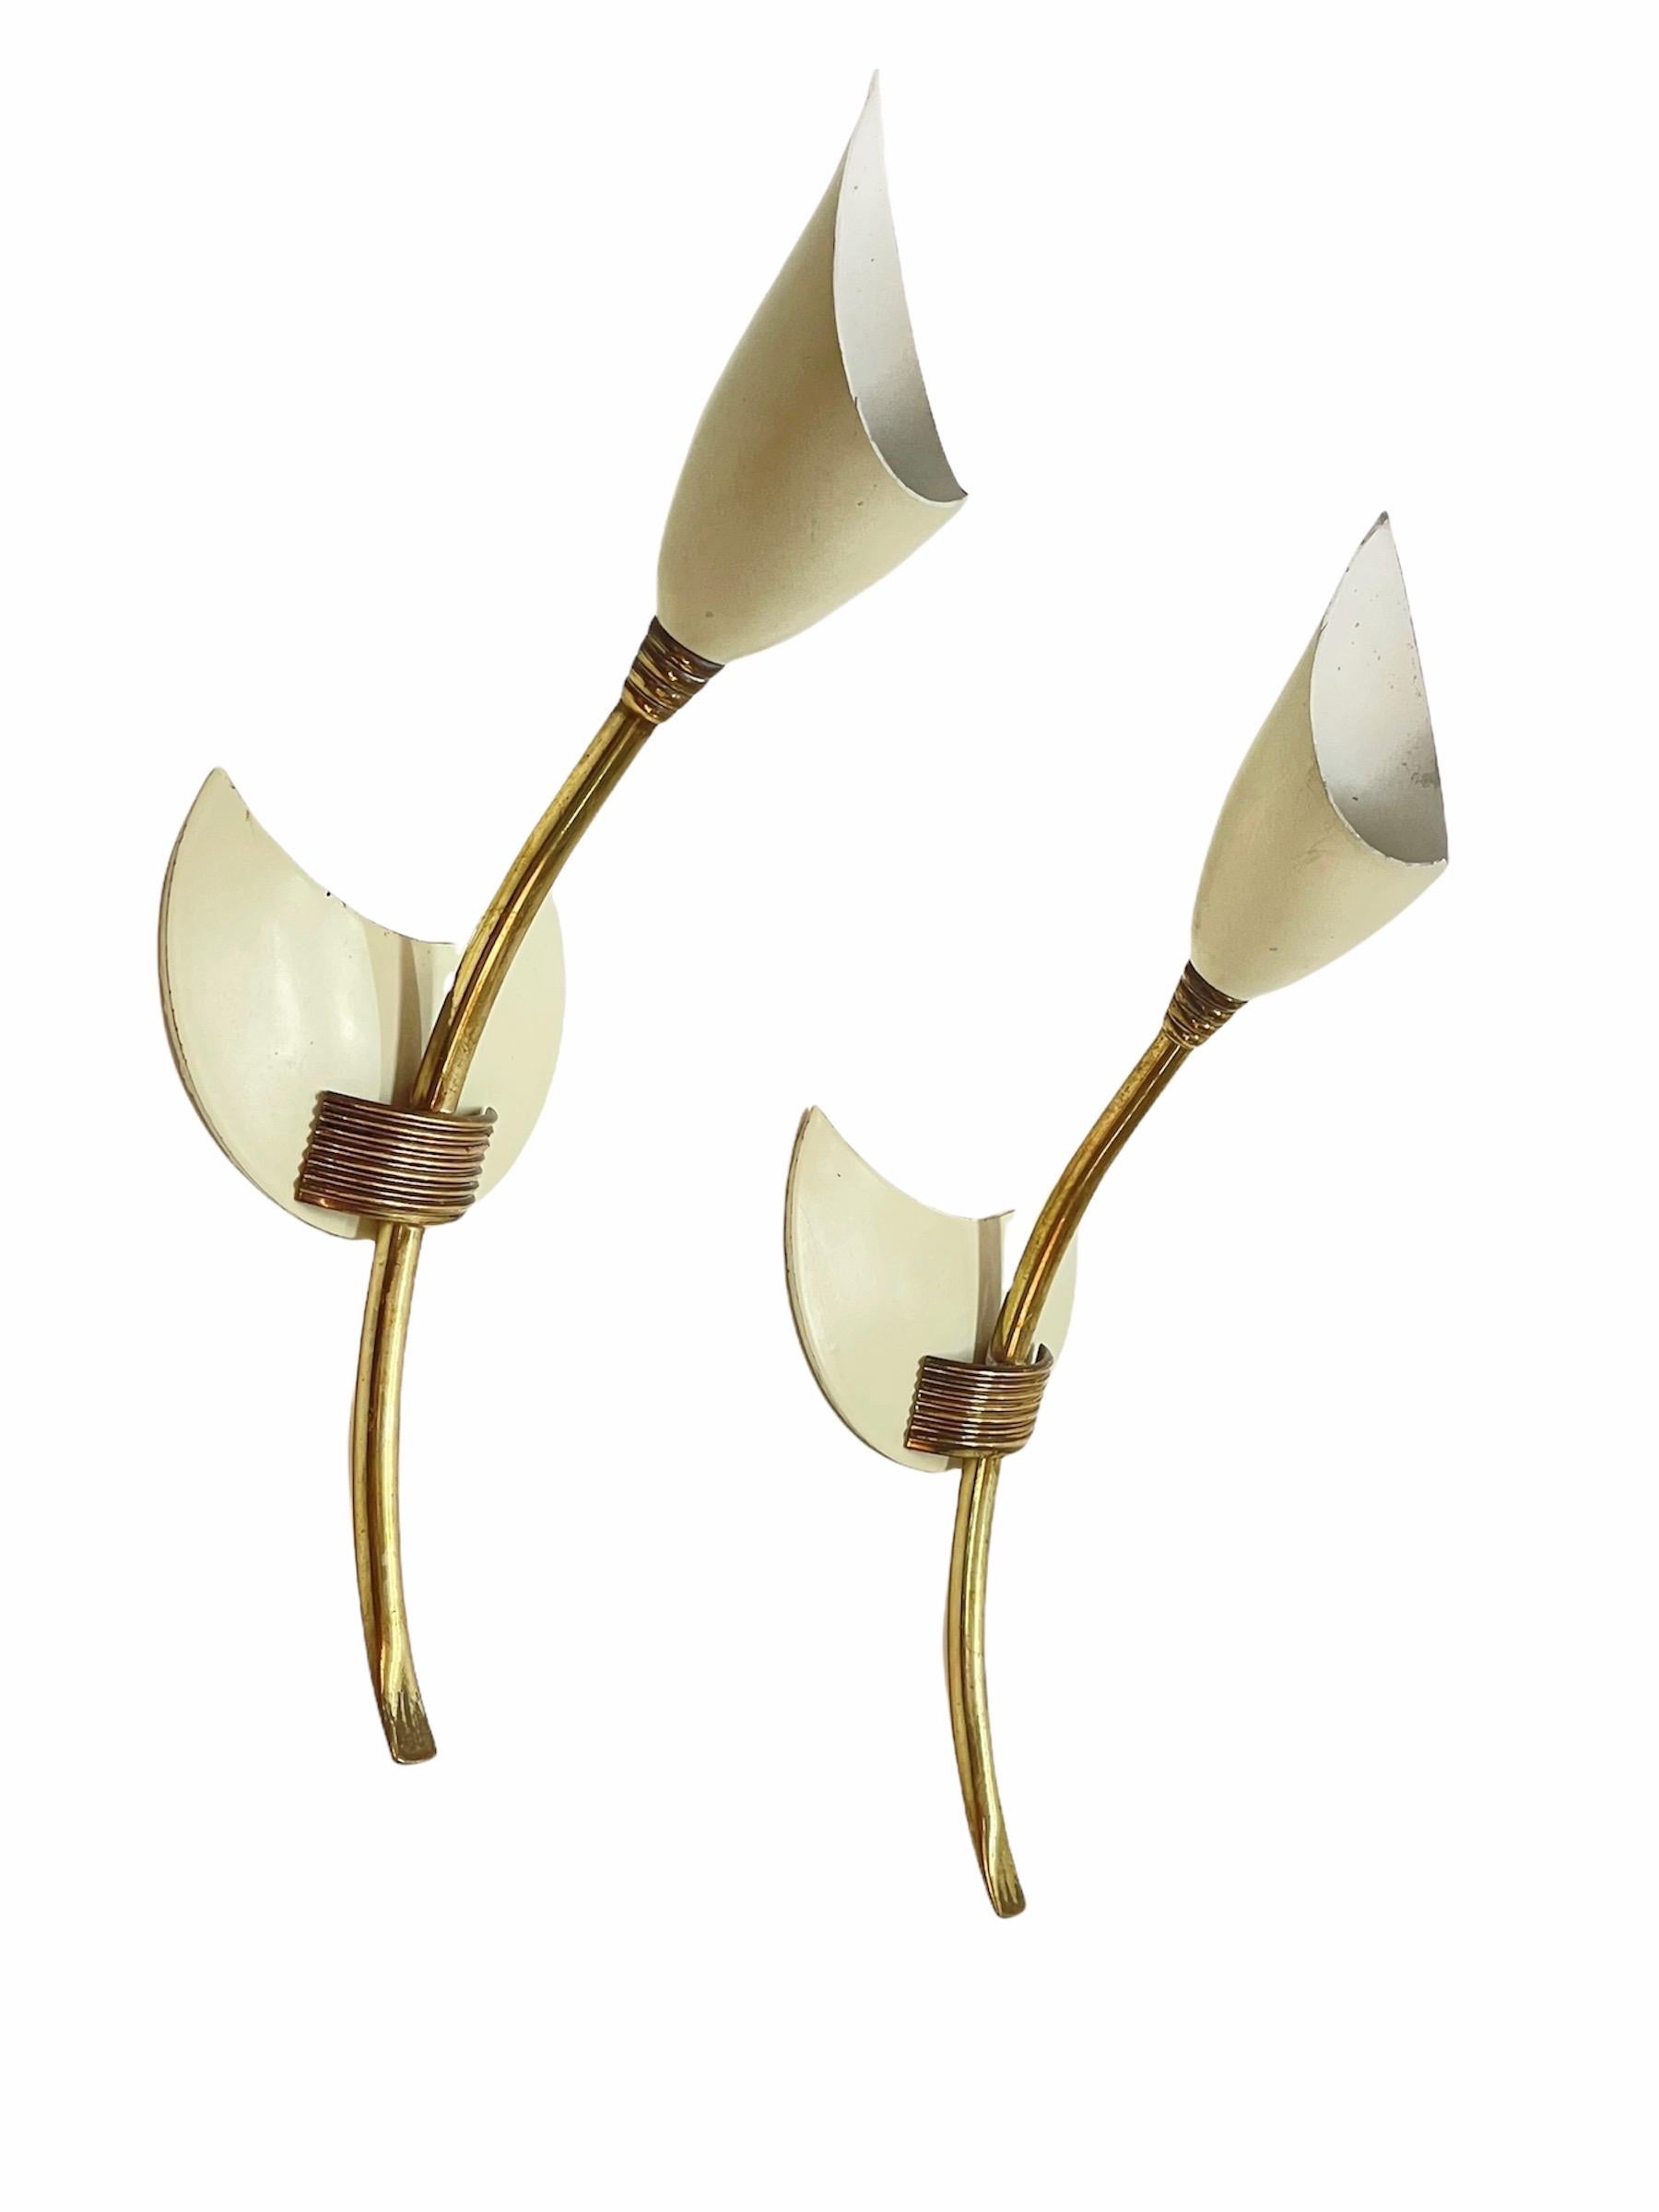 Pair of GCME Midcentury Brass and Enamelled Aluminum Italian Tulip Sconces 1950s For Sale 4